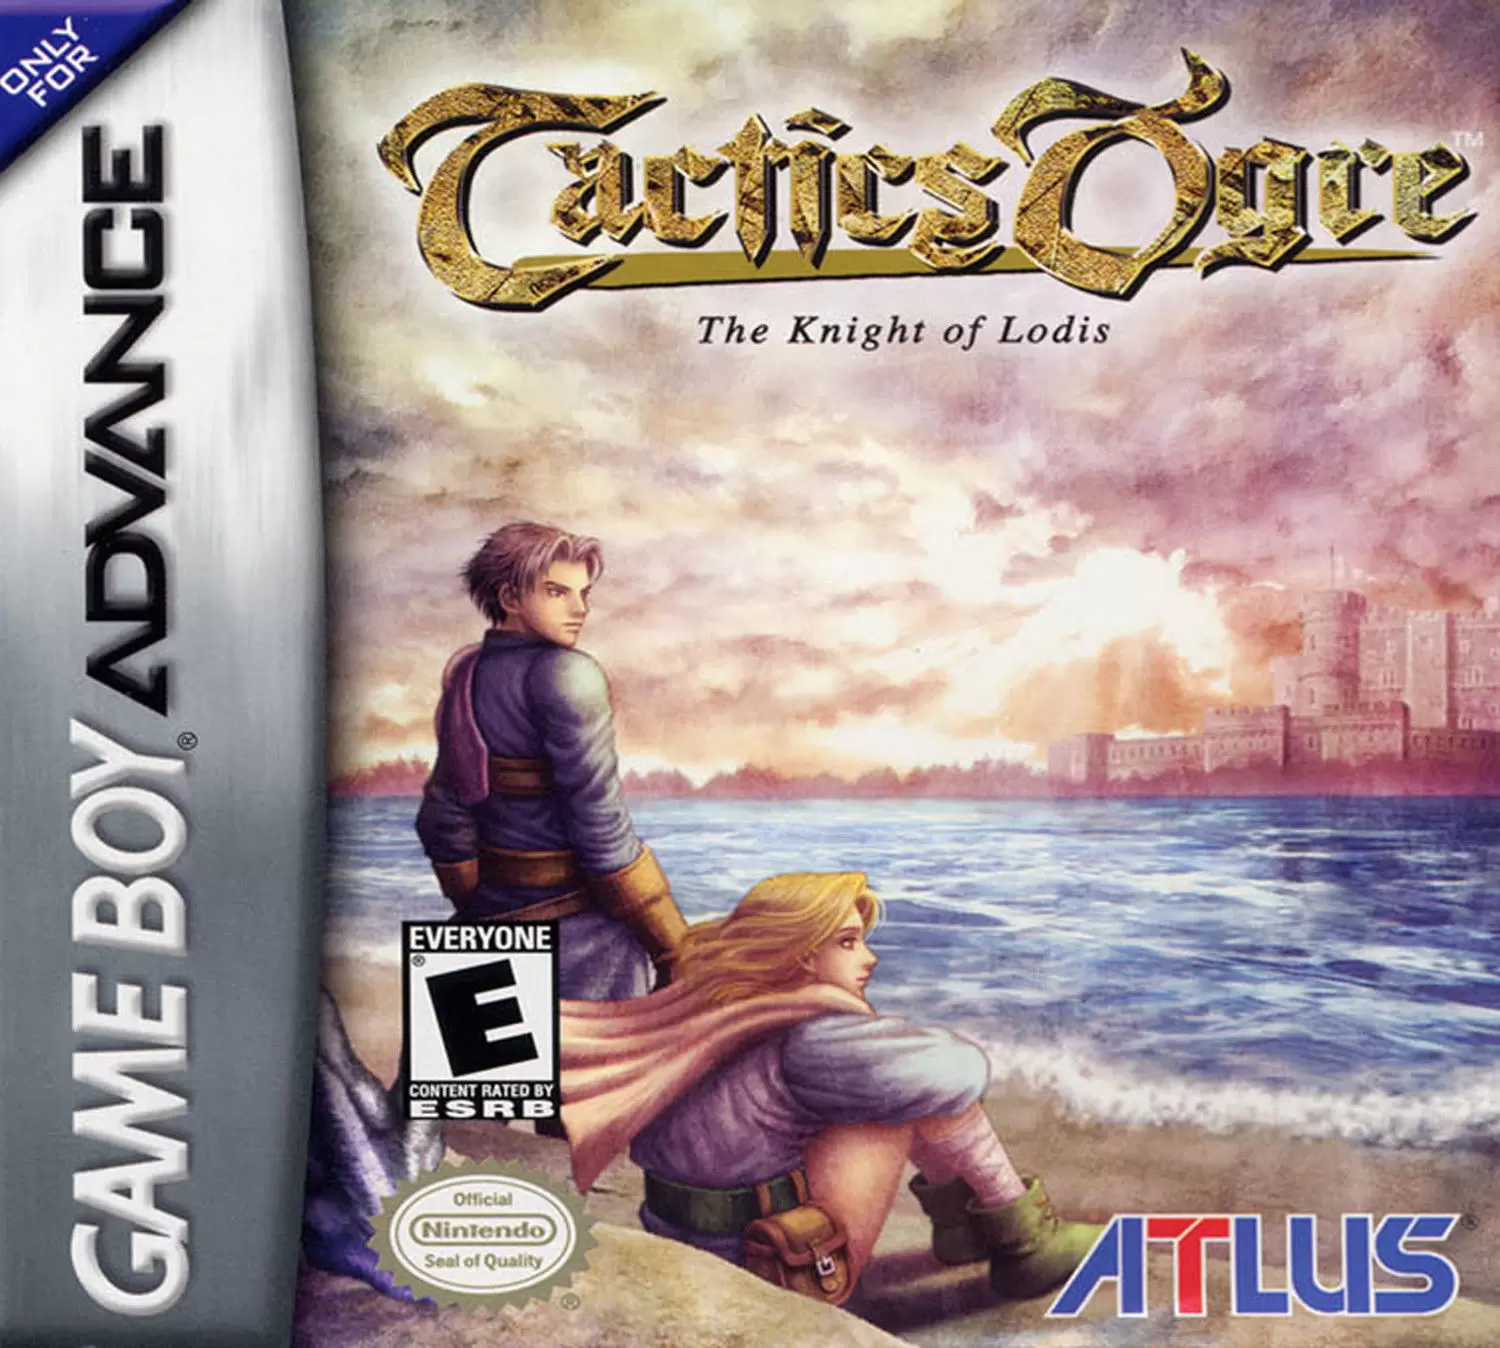 Game Boy Advance Games - Tactics Ogre: The Knight of Lodis